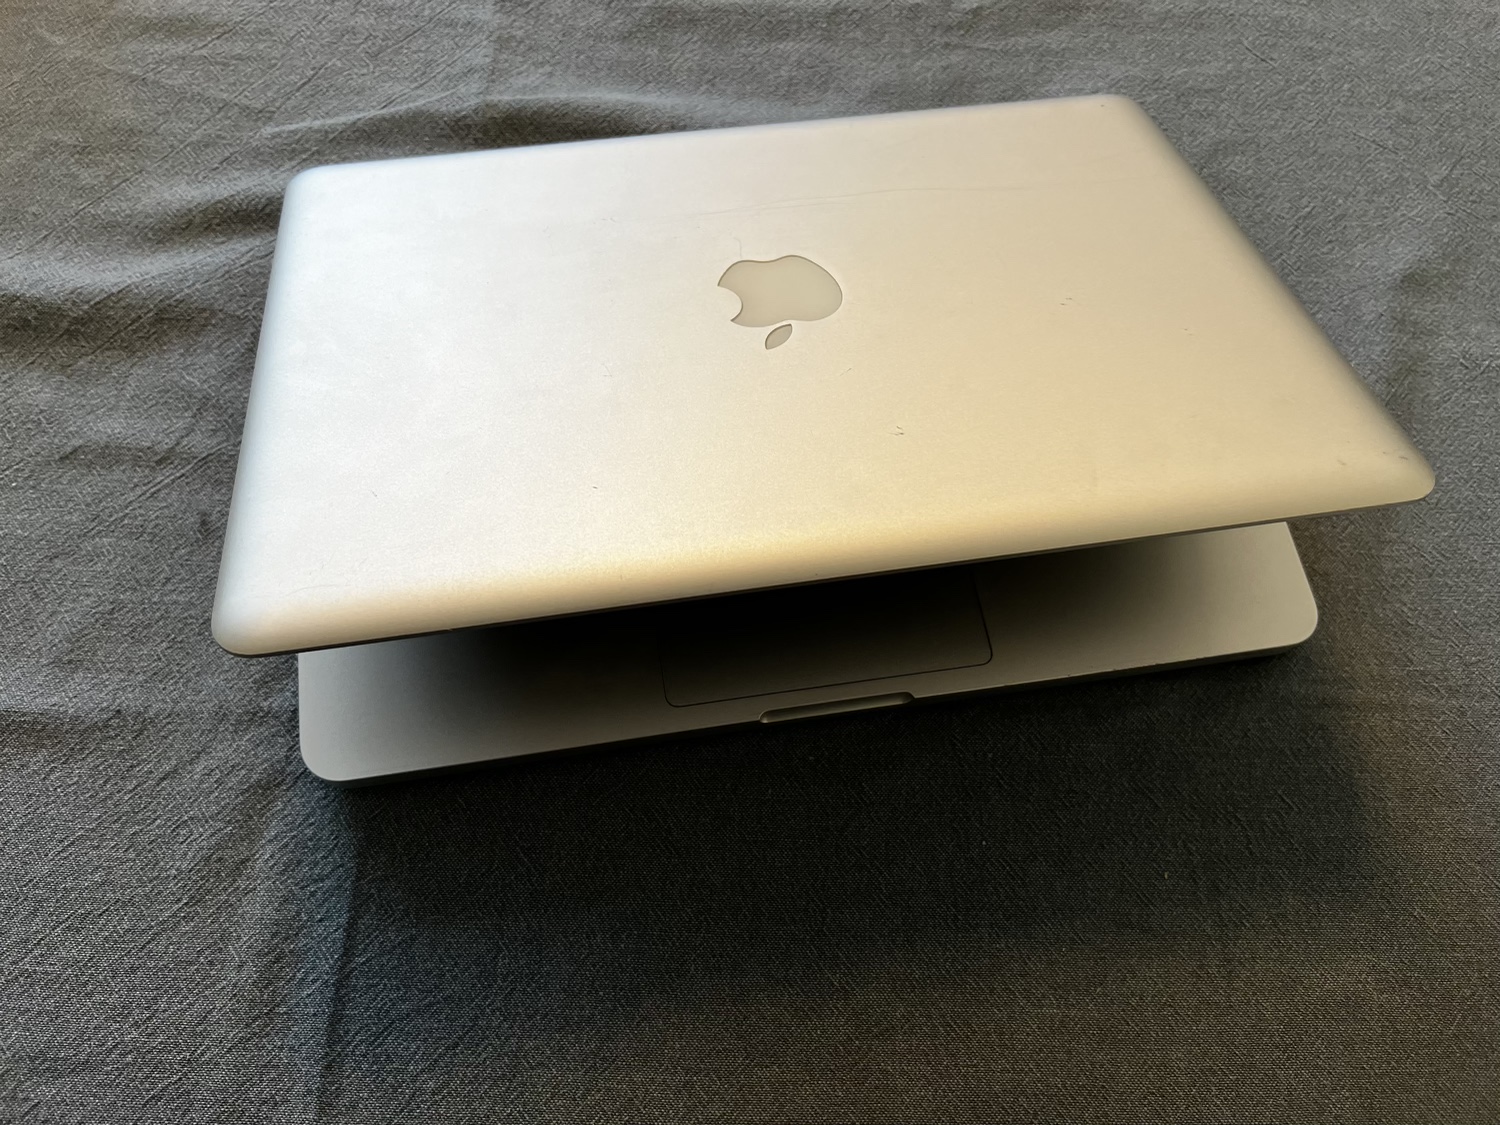 After starting out on a Raspberry Pi, I hosted Home Assistant from this 2011 Macbook Pro - running Ubuntu - for over 4 years. Over the years it also ran a bunch of supporting software: Prometheus, InfluxDB, Logstash, Sensu, Monit, HA Dashboard, Elasticsearch and at least half a dozen others. I've kept [all the related ansible roles in a legacy folder on Github](https://github.com/jorisroovers/casa/tree/master/legacy/roles).